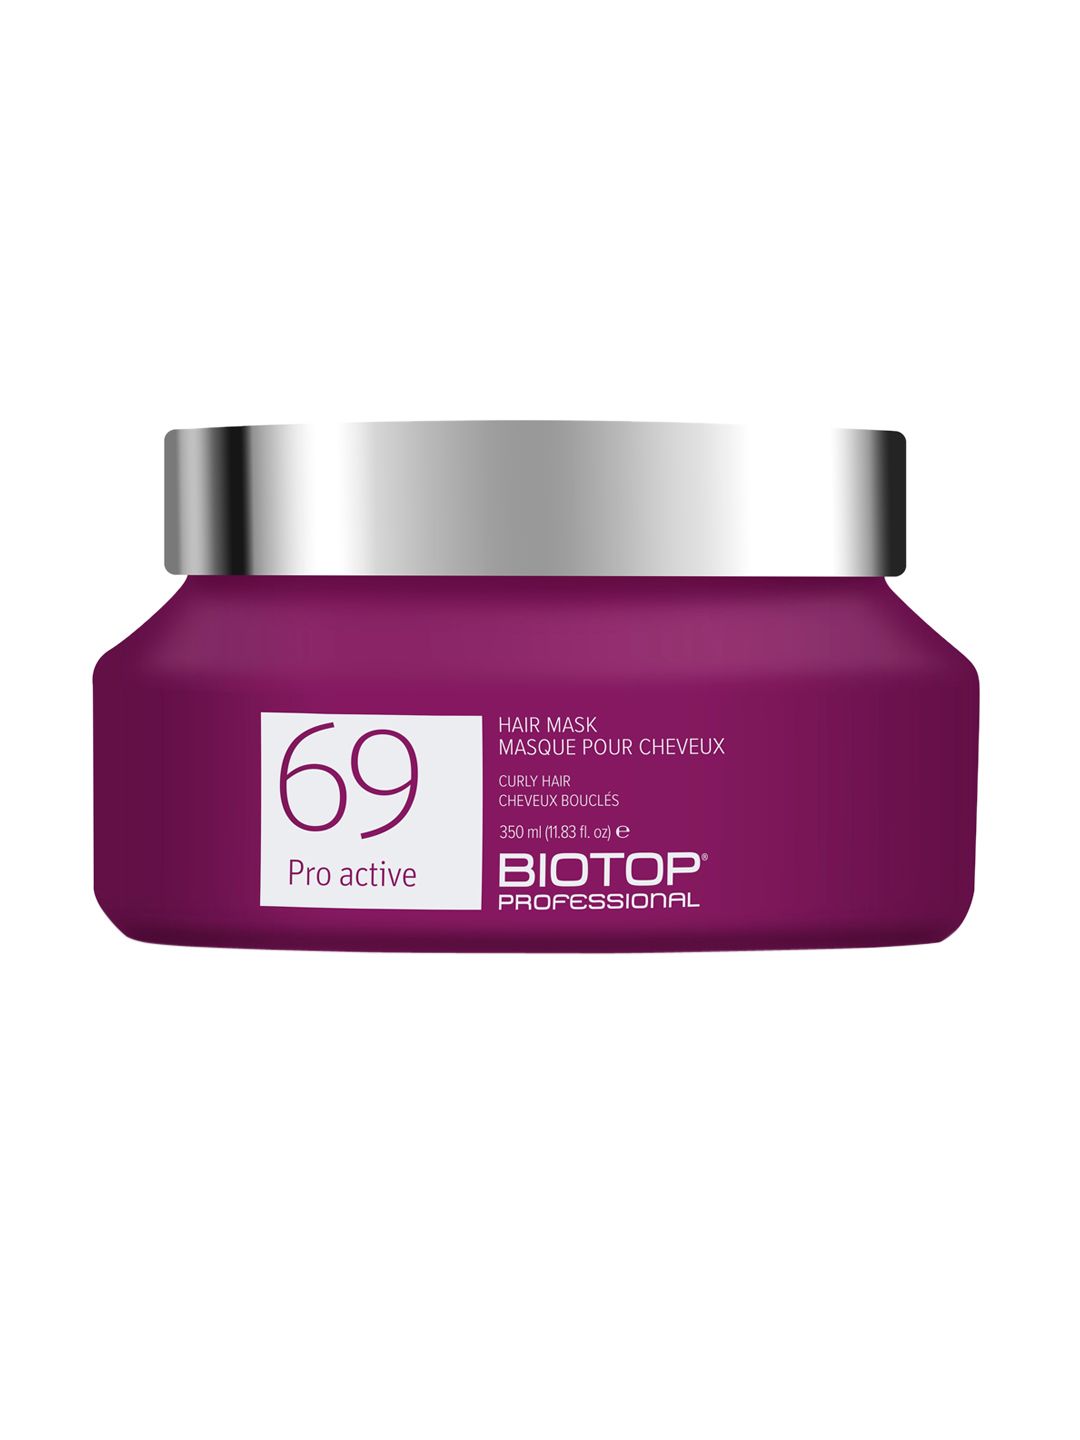 BIOTOP PROFESSIONAL 69 Pro Active Hair Mask For Curly Hair & Cheveux Boucles 350ml Price in India